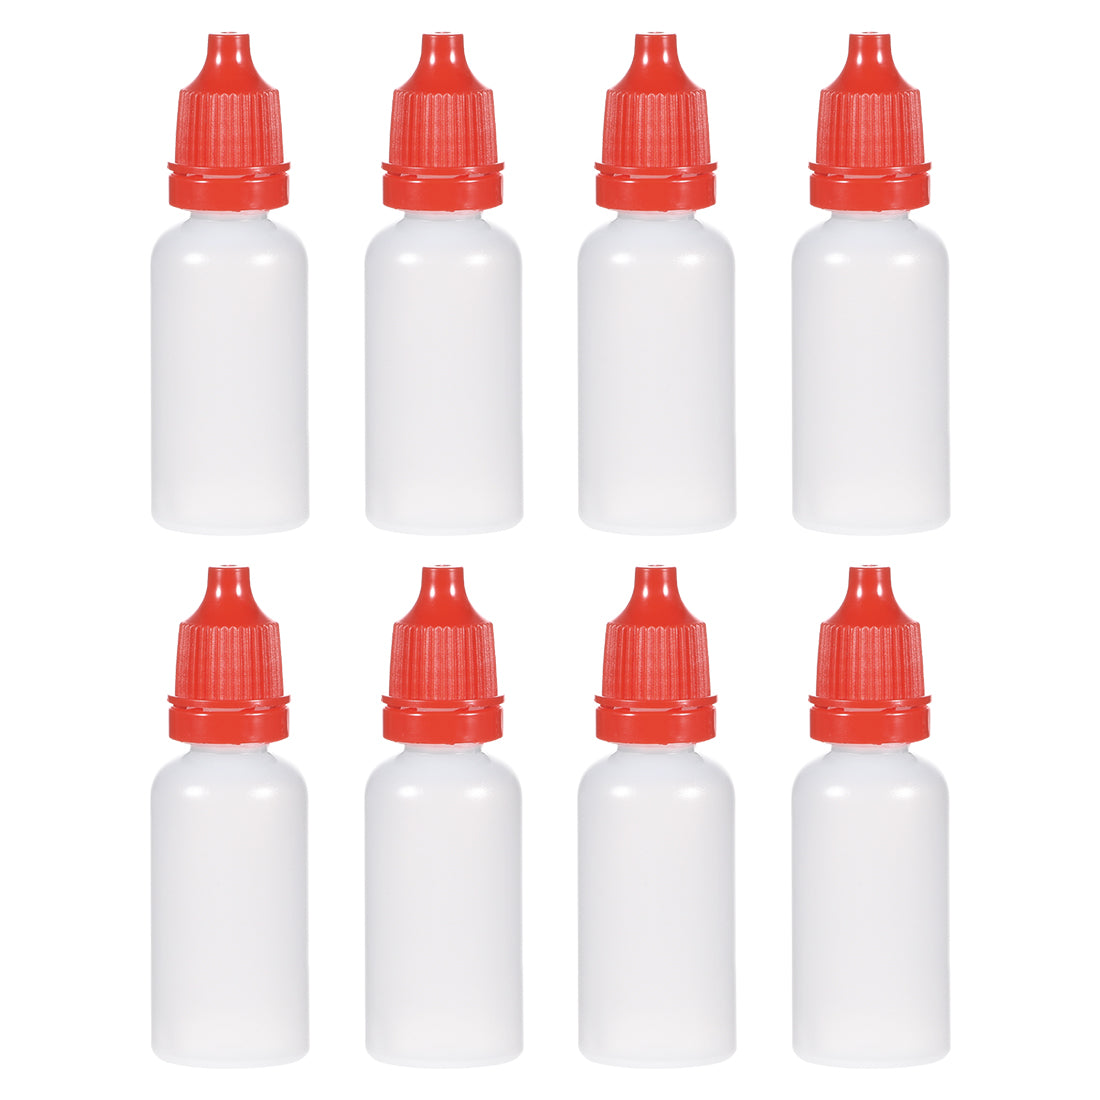 uxcell Uxcell 15ml/0.5 oz Empty Squeezable Dropper Bottle Red 8pcs